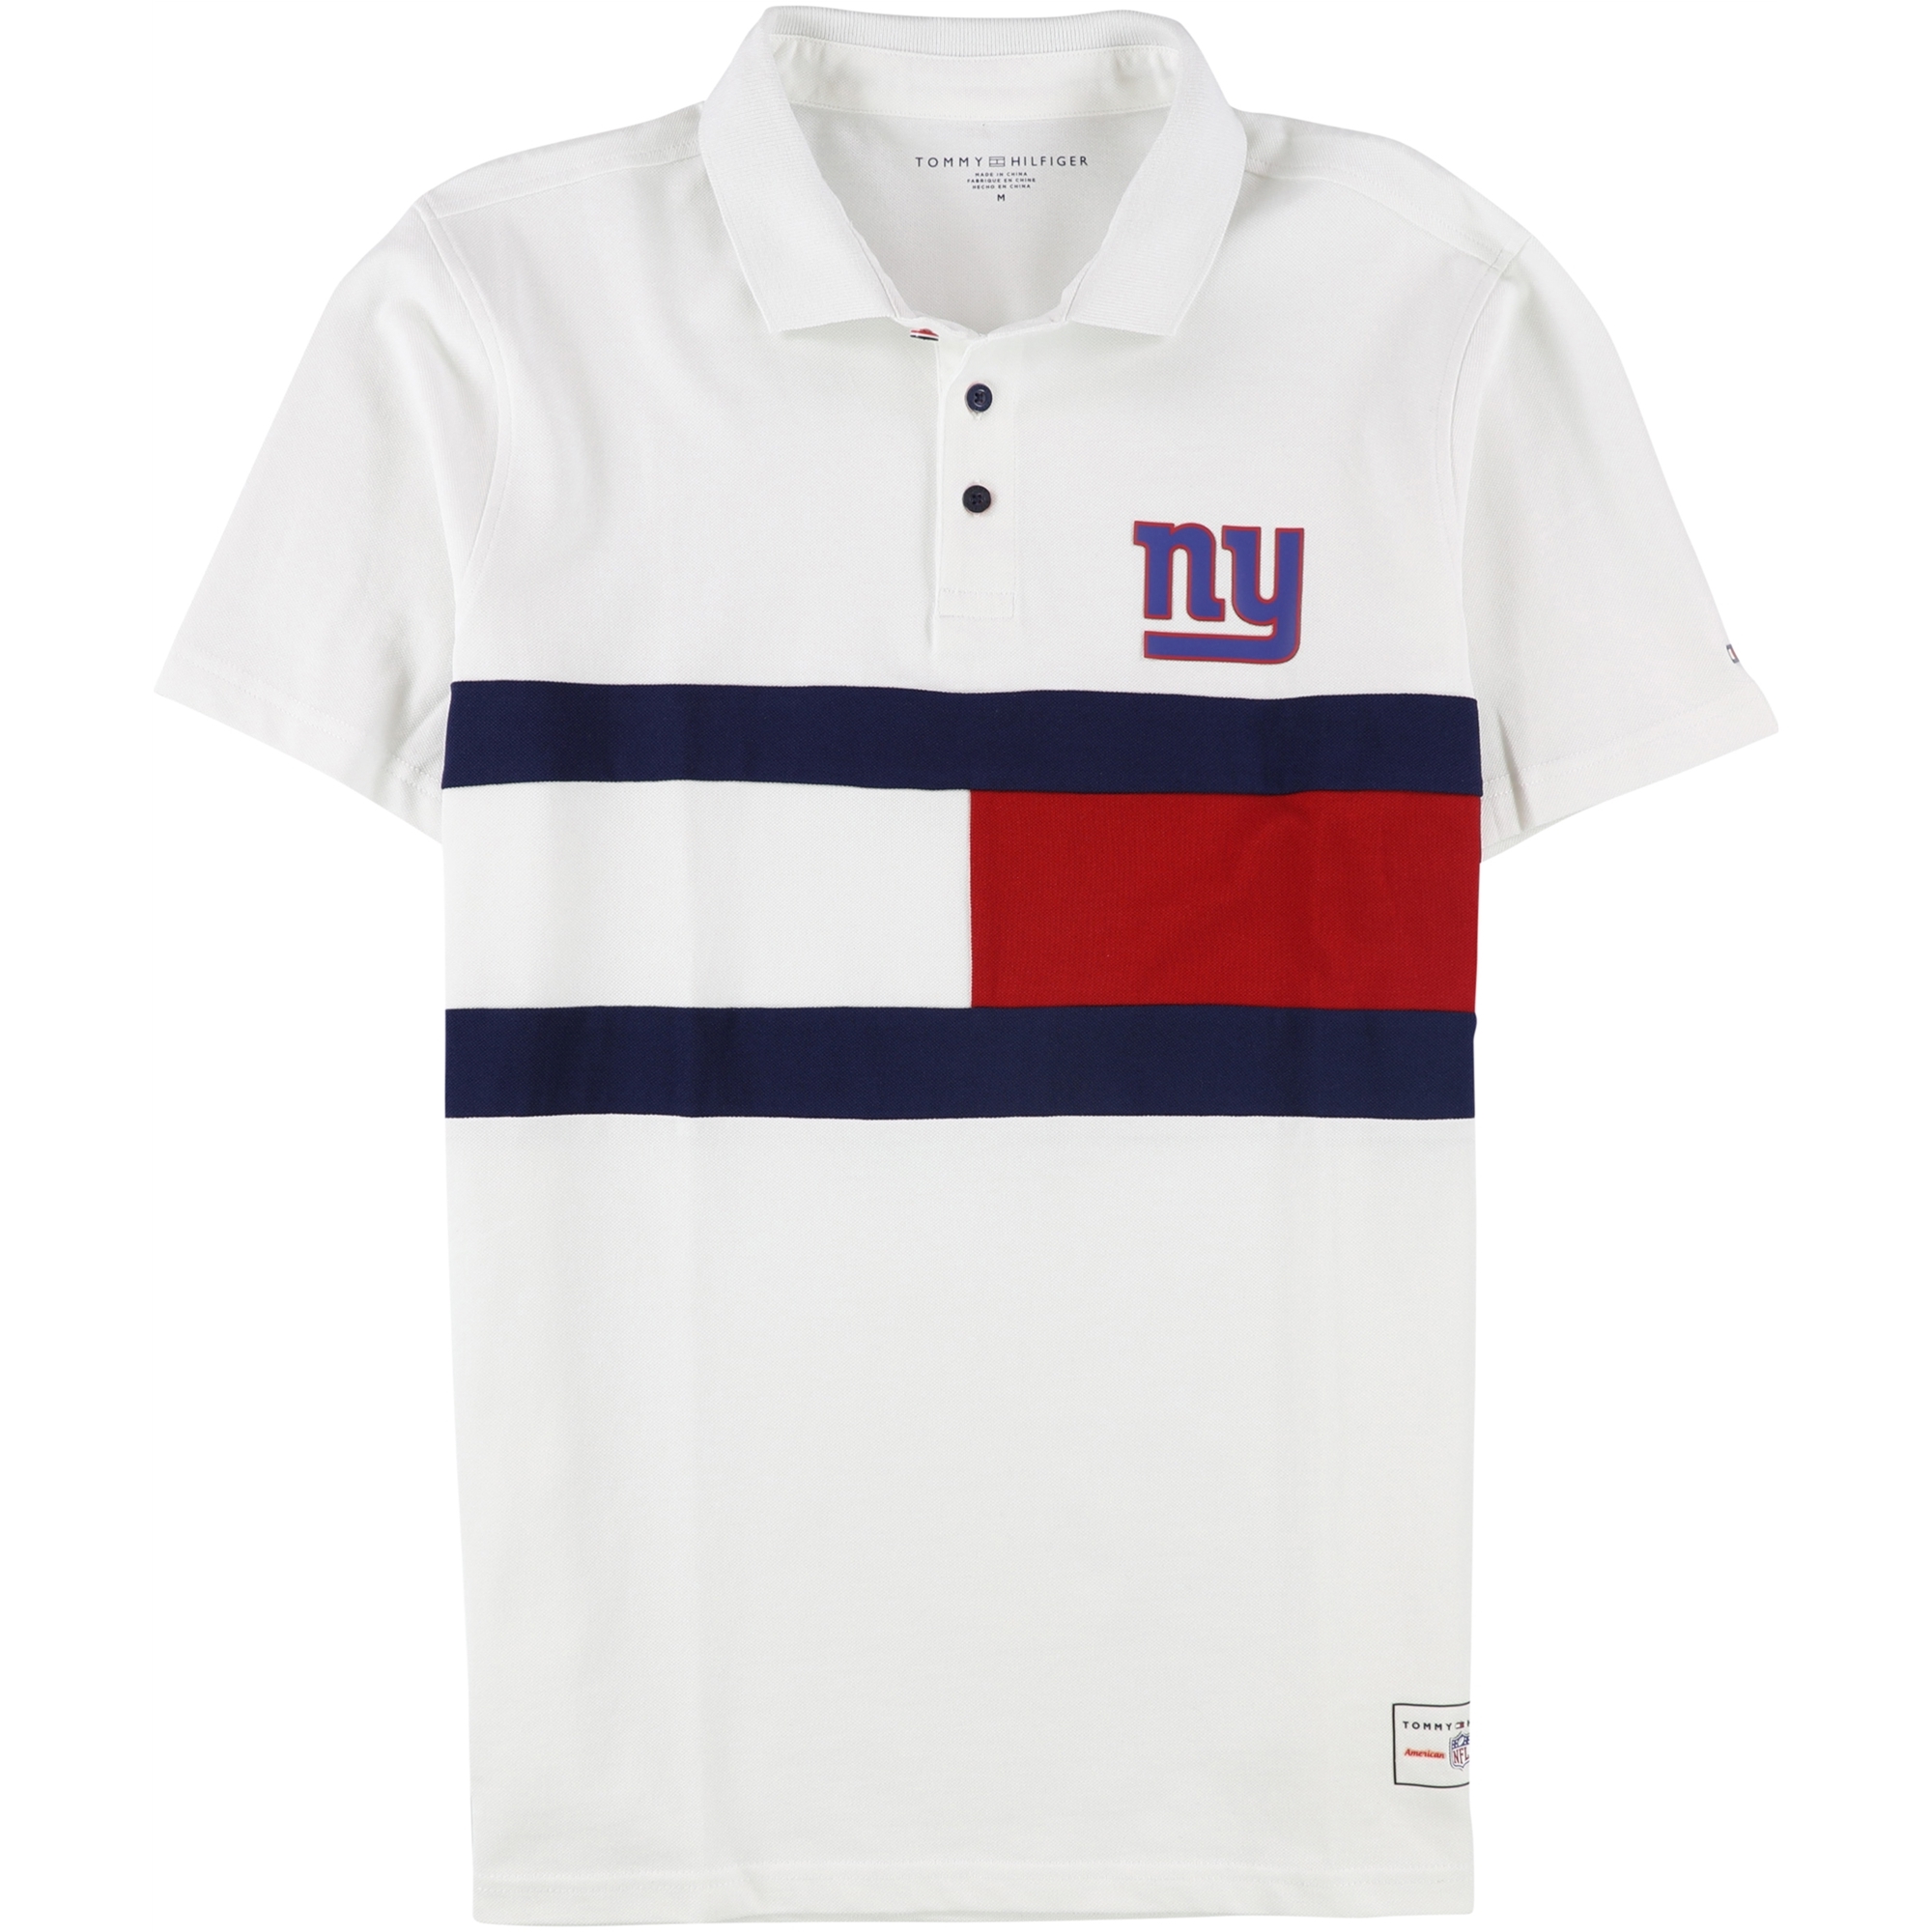 Buy a Tommy Hilfiger Mens New York Giants Rugby Polo Shirt | Tagsweekly